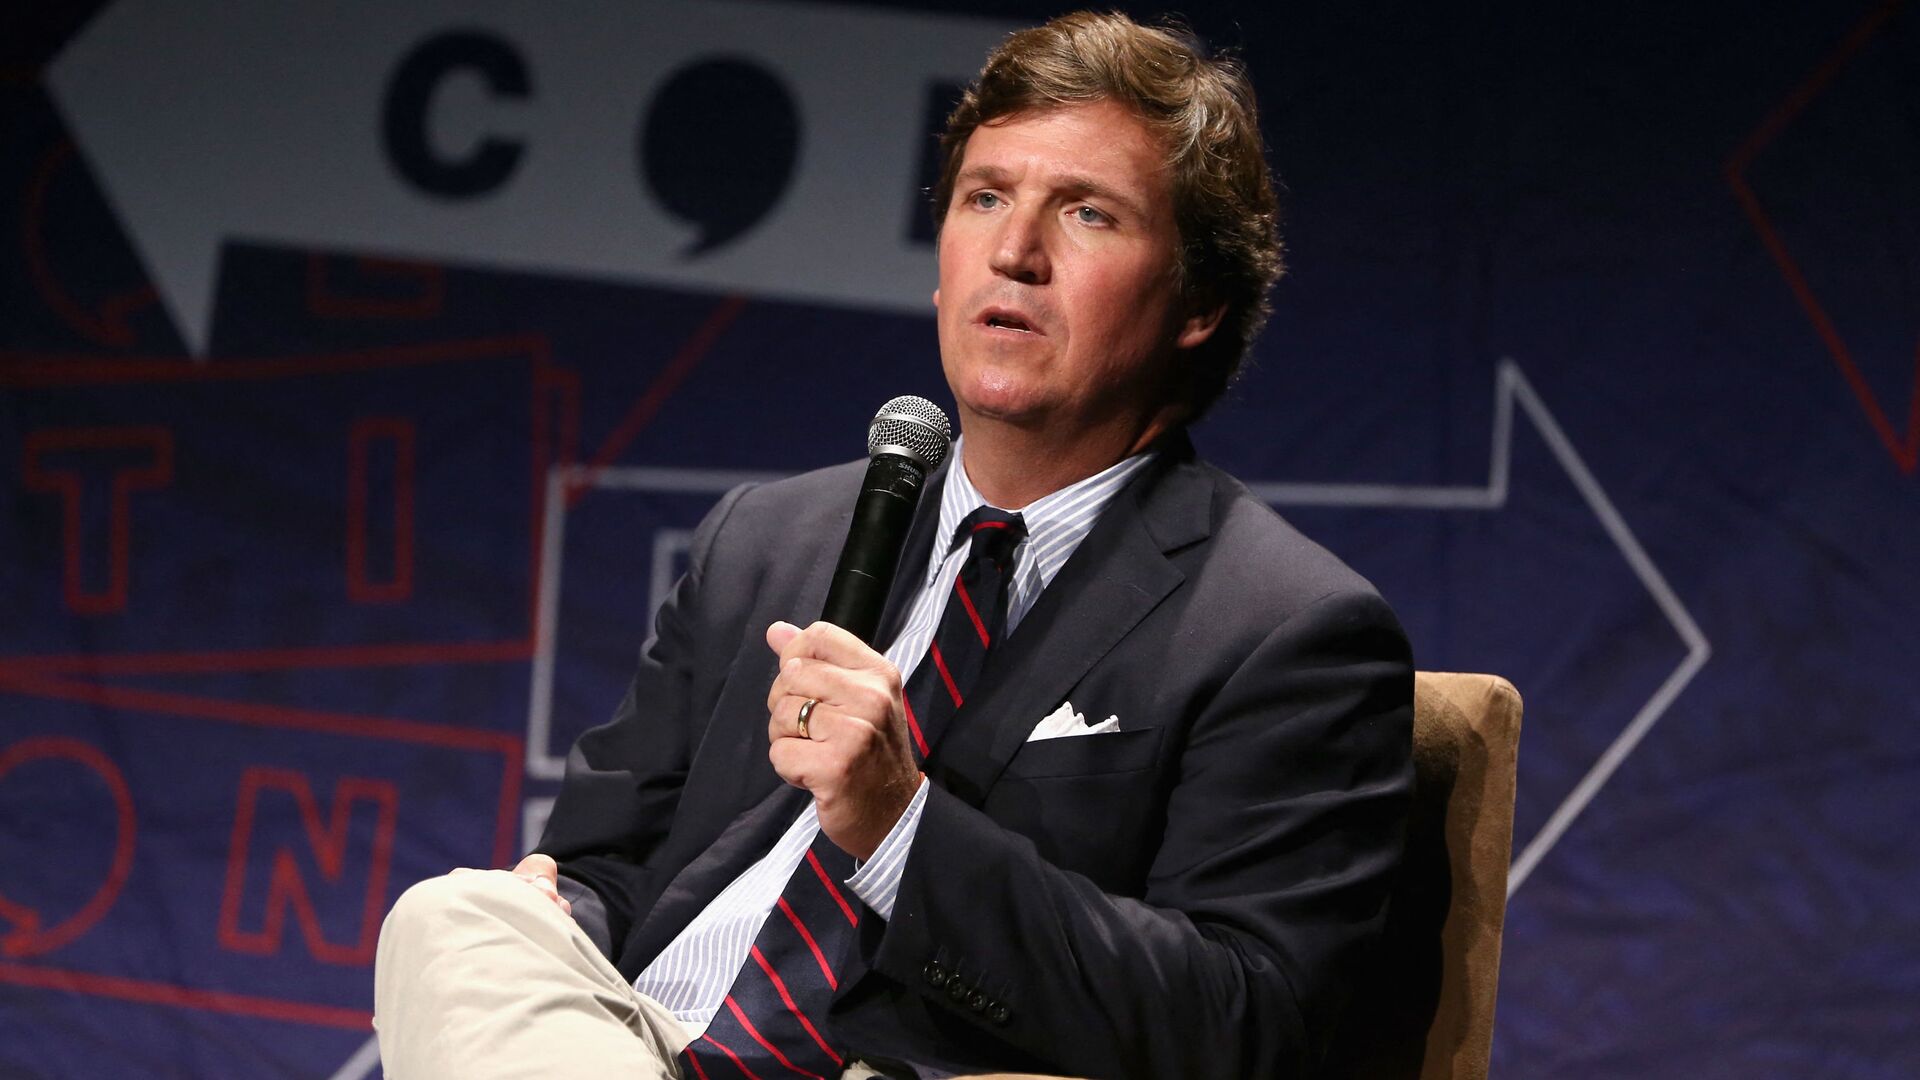 Tucker Carlson speaks onstage during Politicon 2018 at Los Angeles Convention Center on October 21, 2018 in Los Angeles, California - Sputnik International, 1920, 11.03.2022